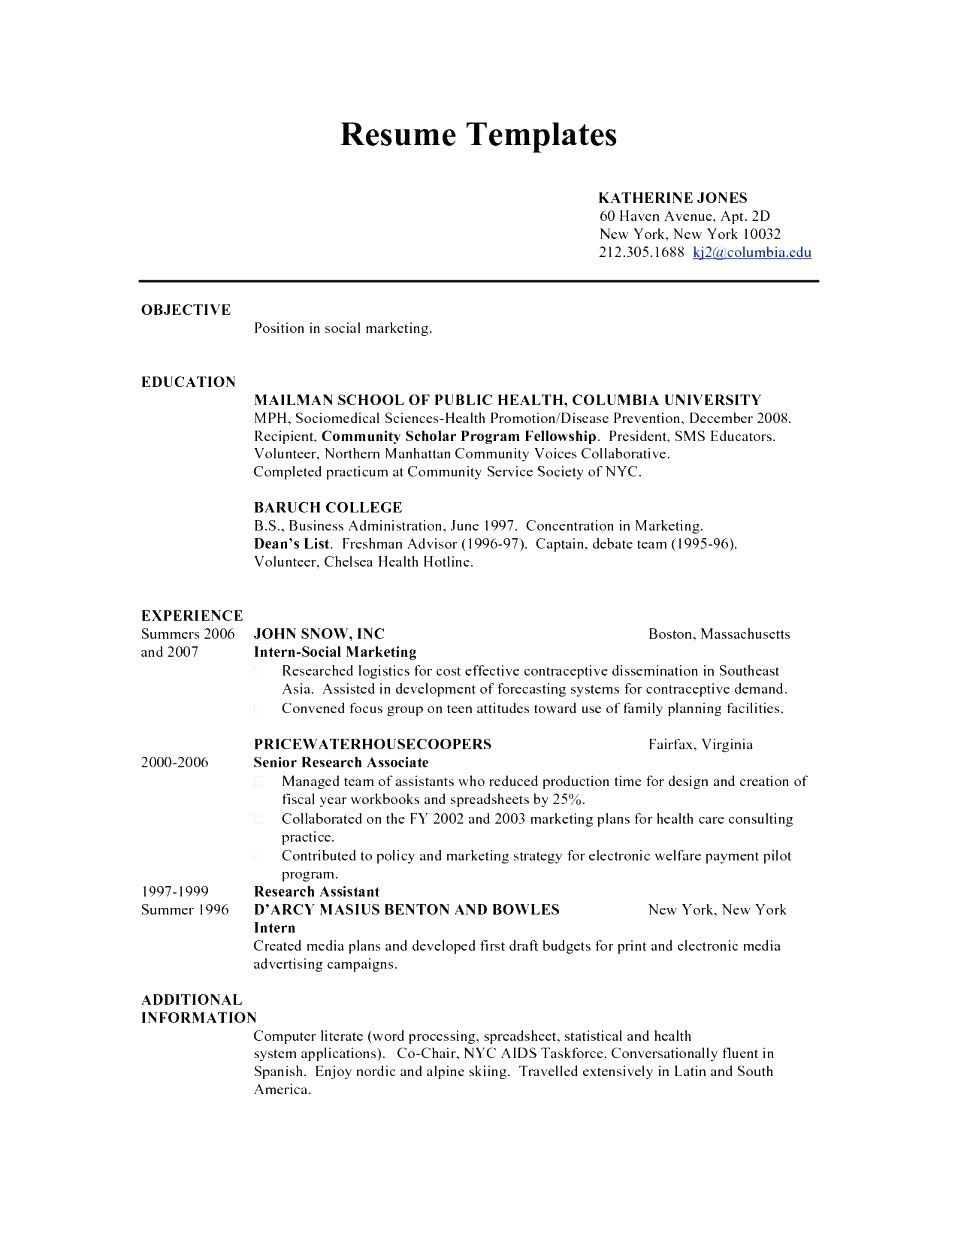 Cover Letter Template 16 Year Old intended for dimensions 958 X 1240